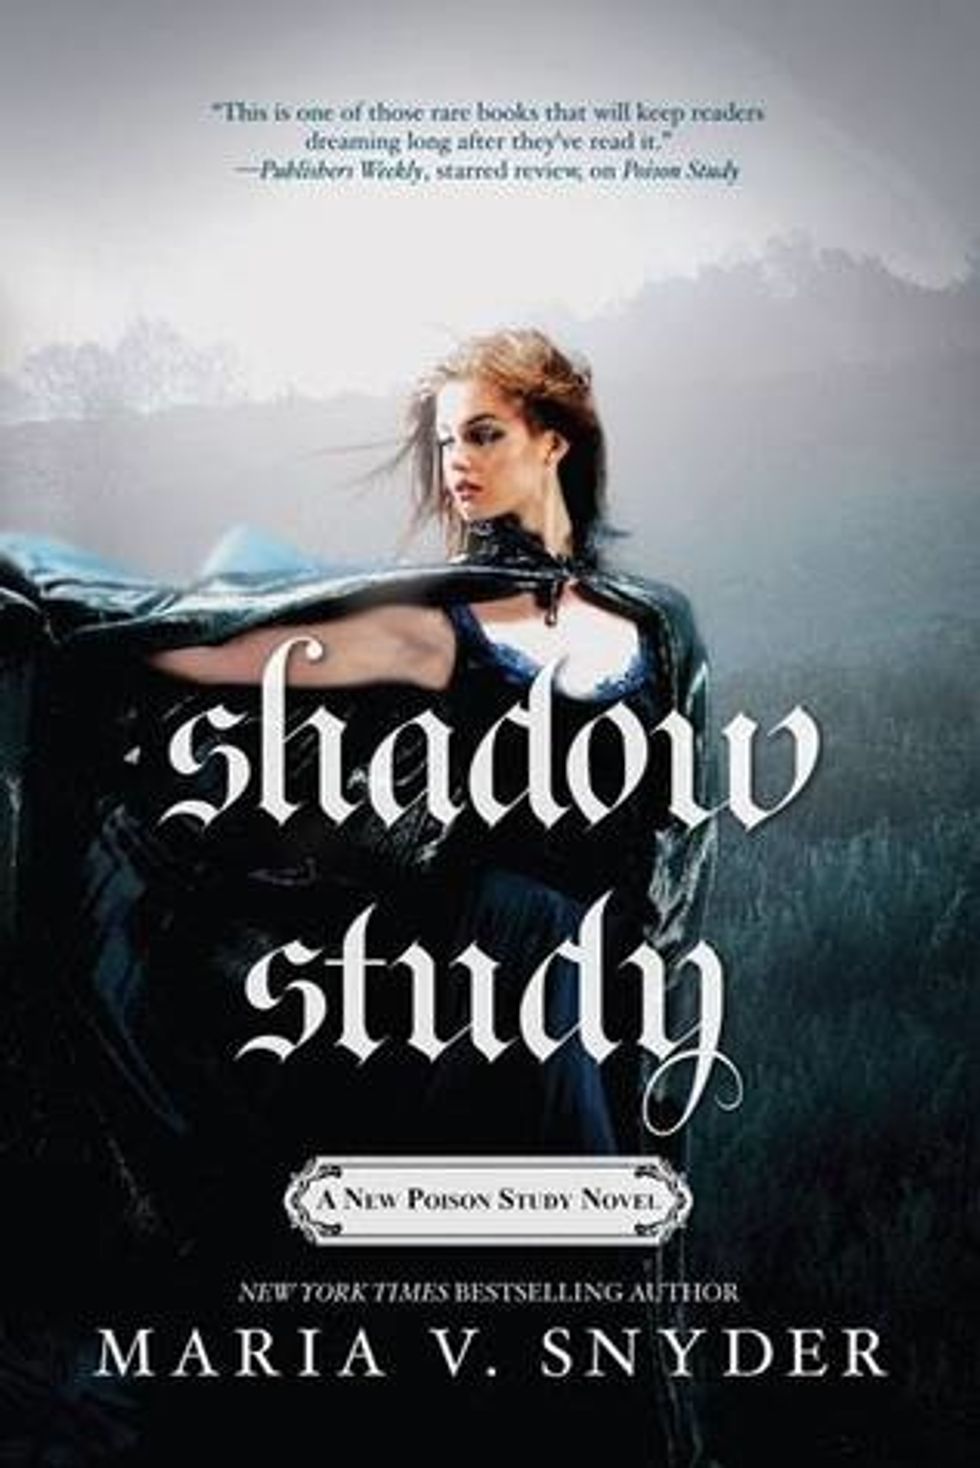 Review of Shadow Study by Maria V. Snyder